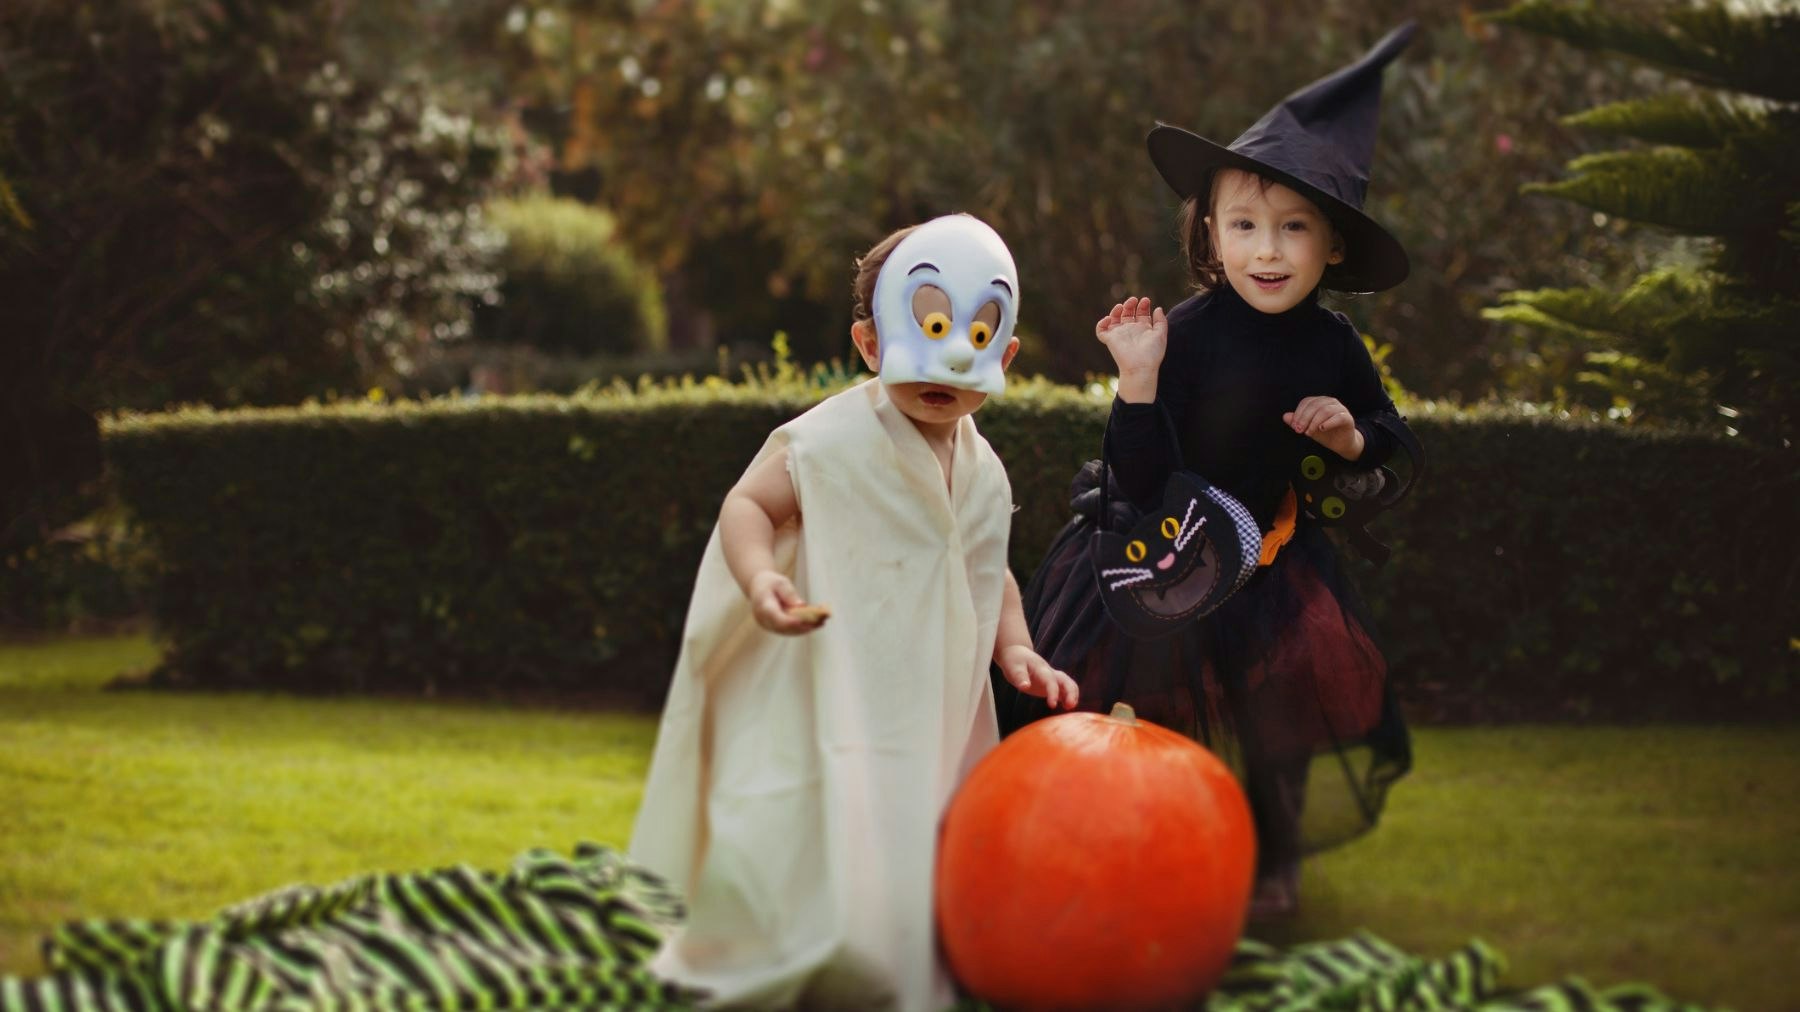 10 Great Halloween Costumes For Kids